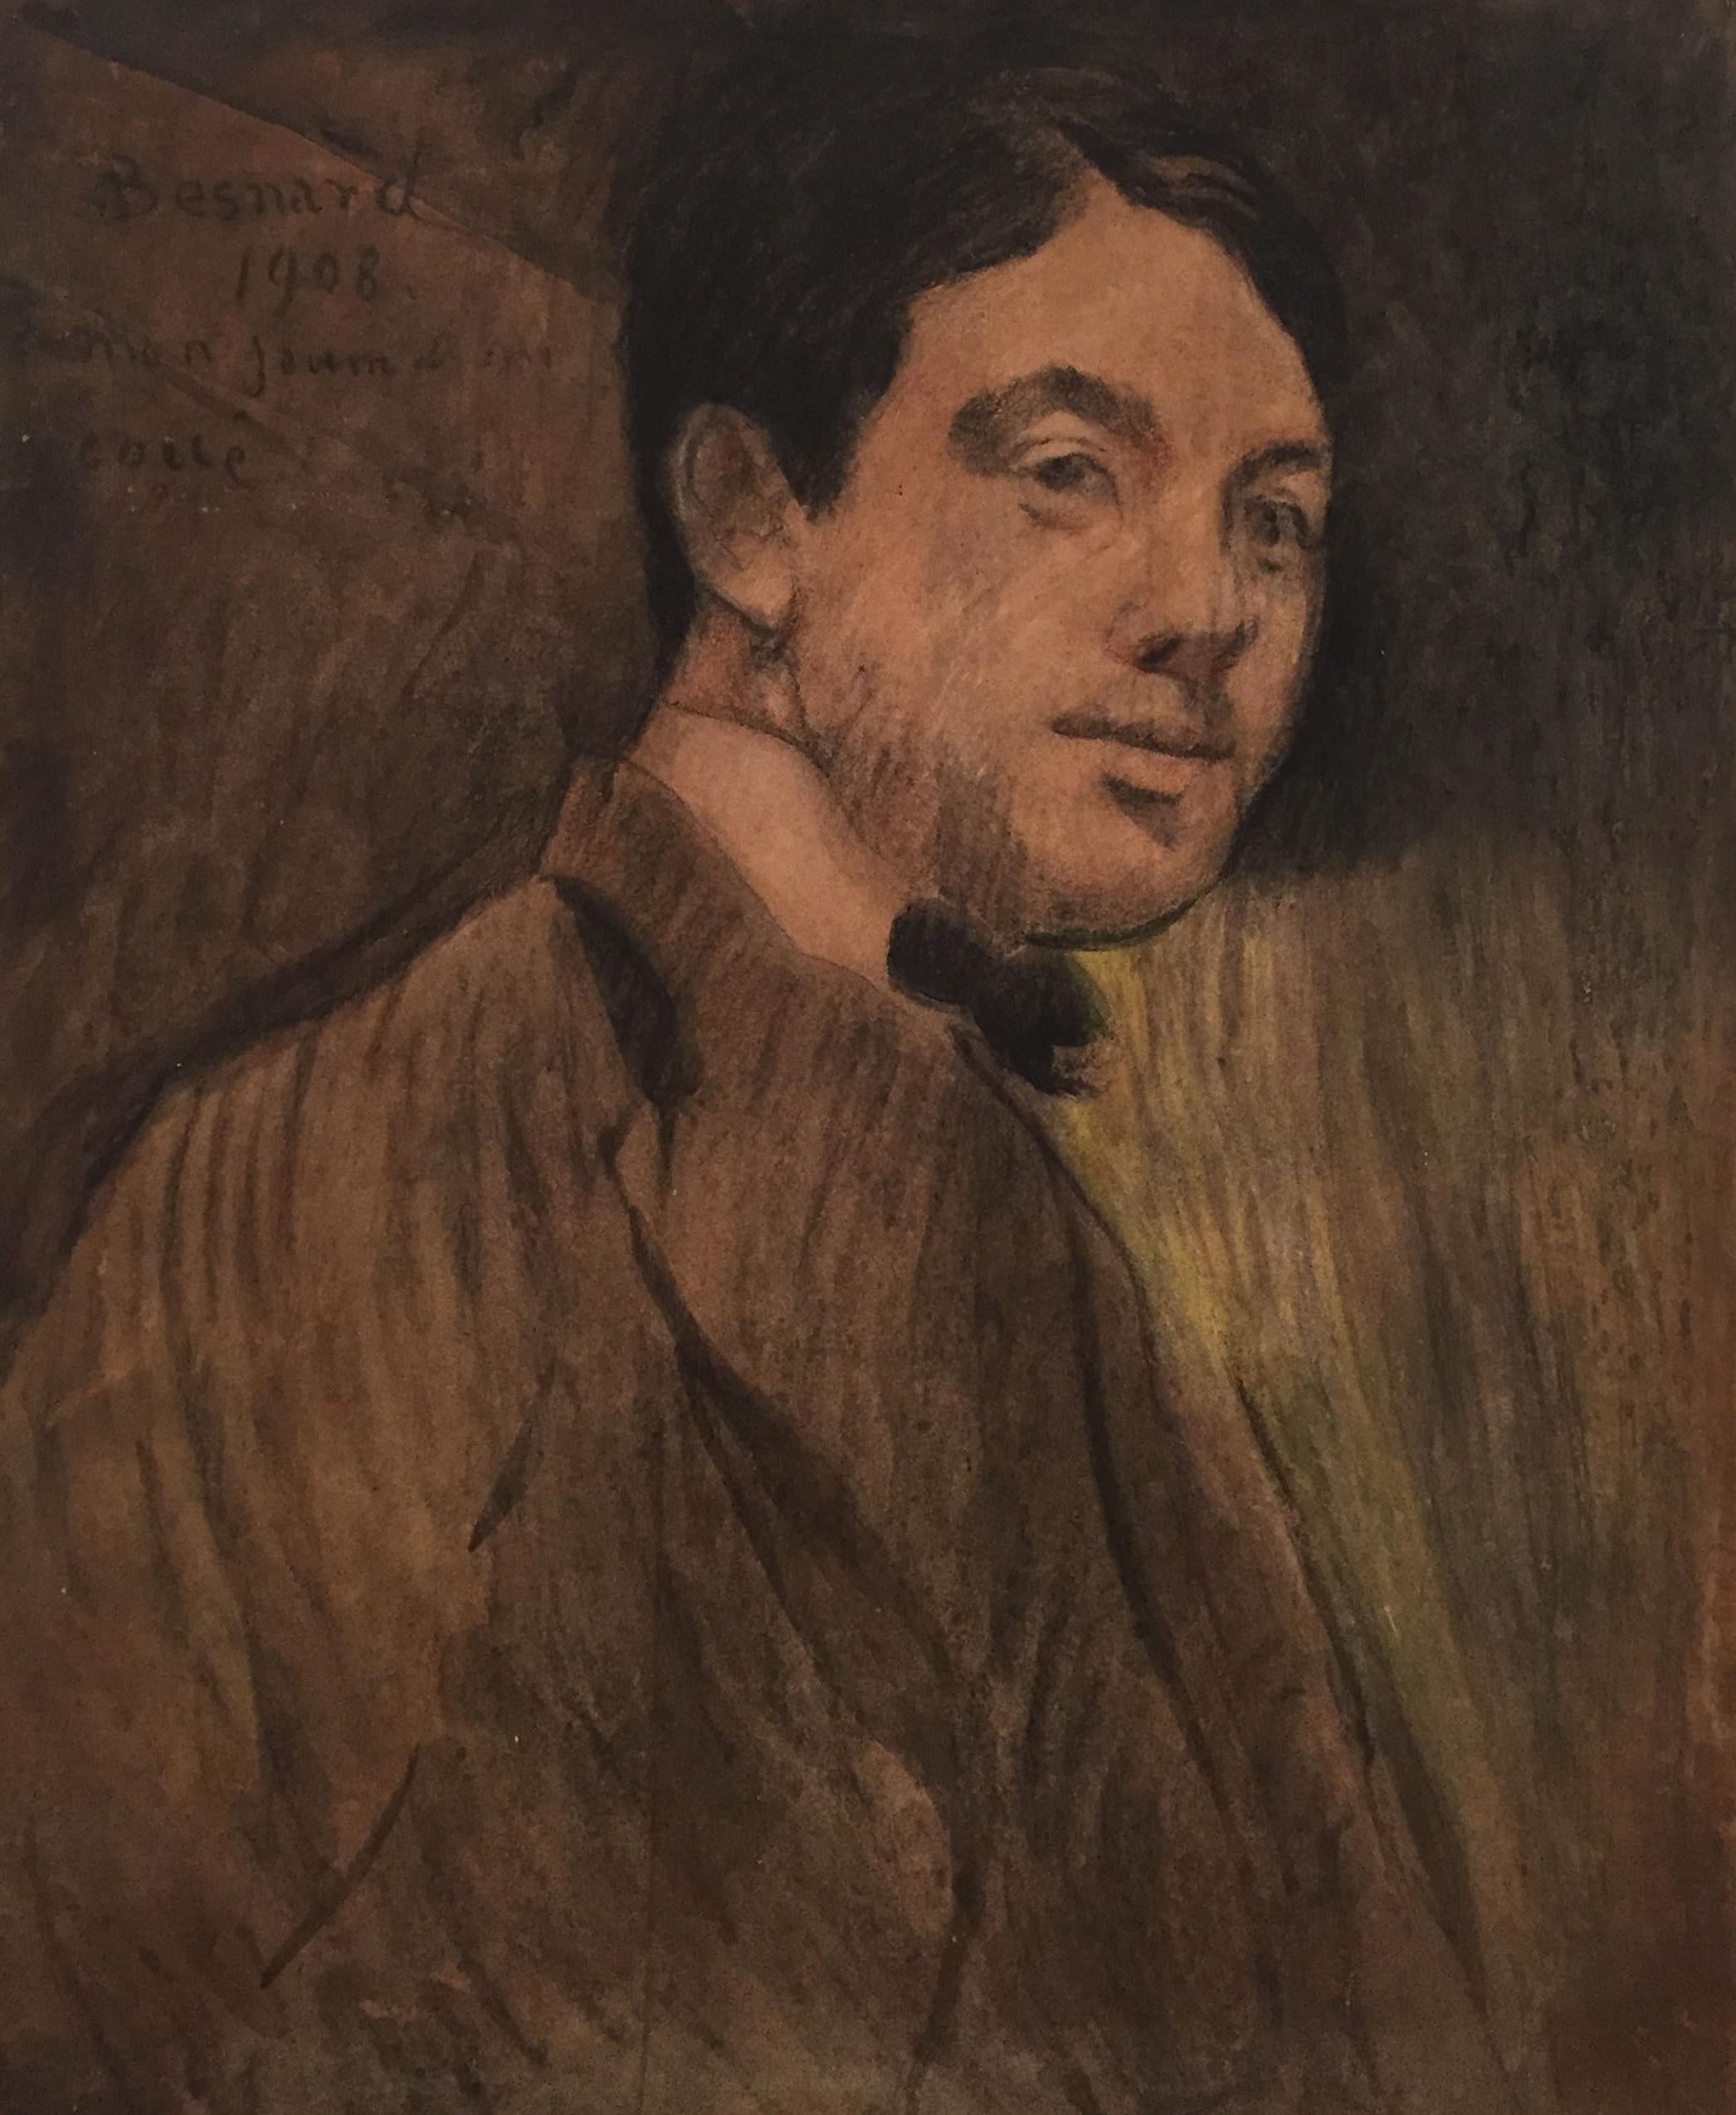 Paul-Albert Besnard (1849-1934) Portrait de jeune, 1908, crayon on cardboard, signed, dated and dedicated top left.

SIZE: cm. 56.5 x 45.5 x 0.5 - SIZE WITH FRAME: cm. 68.5 x 57 x 3.5

Certificate of Authenticity:
Galleria